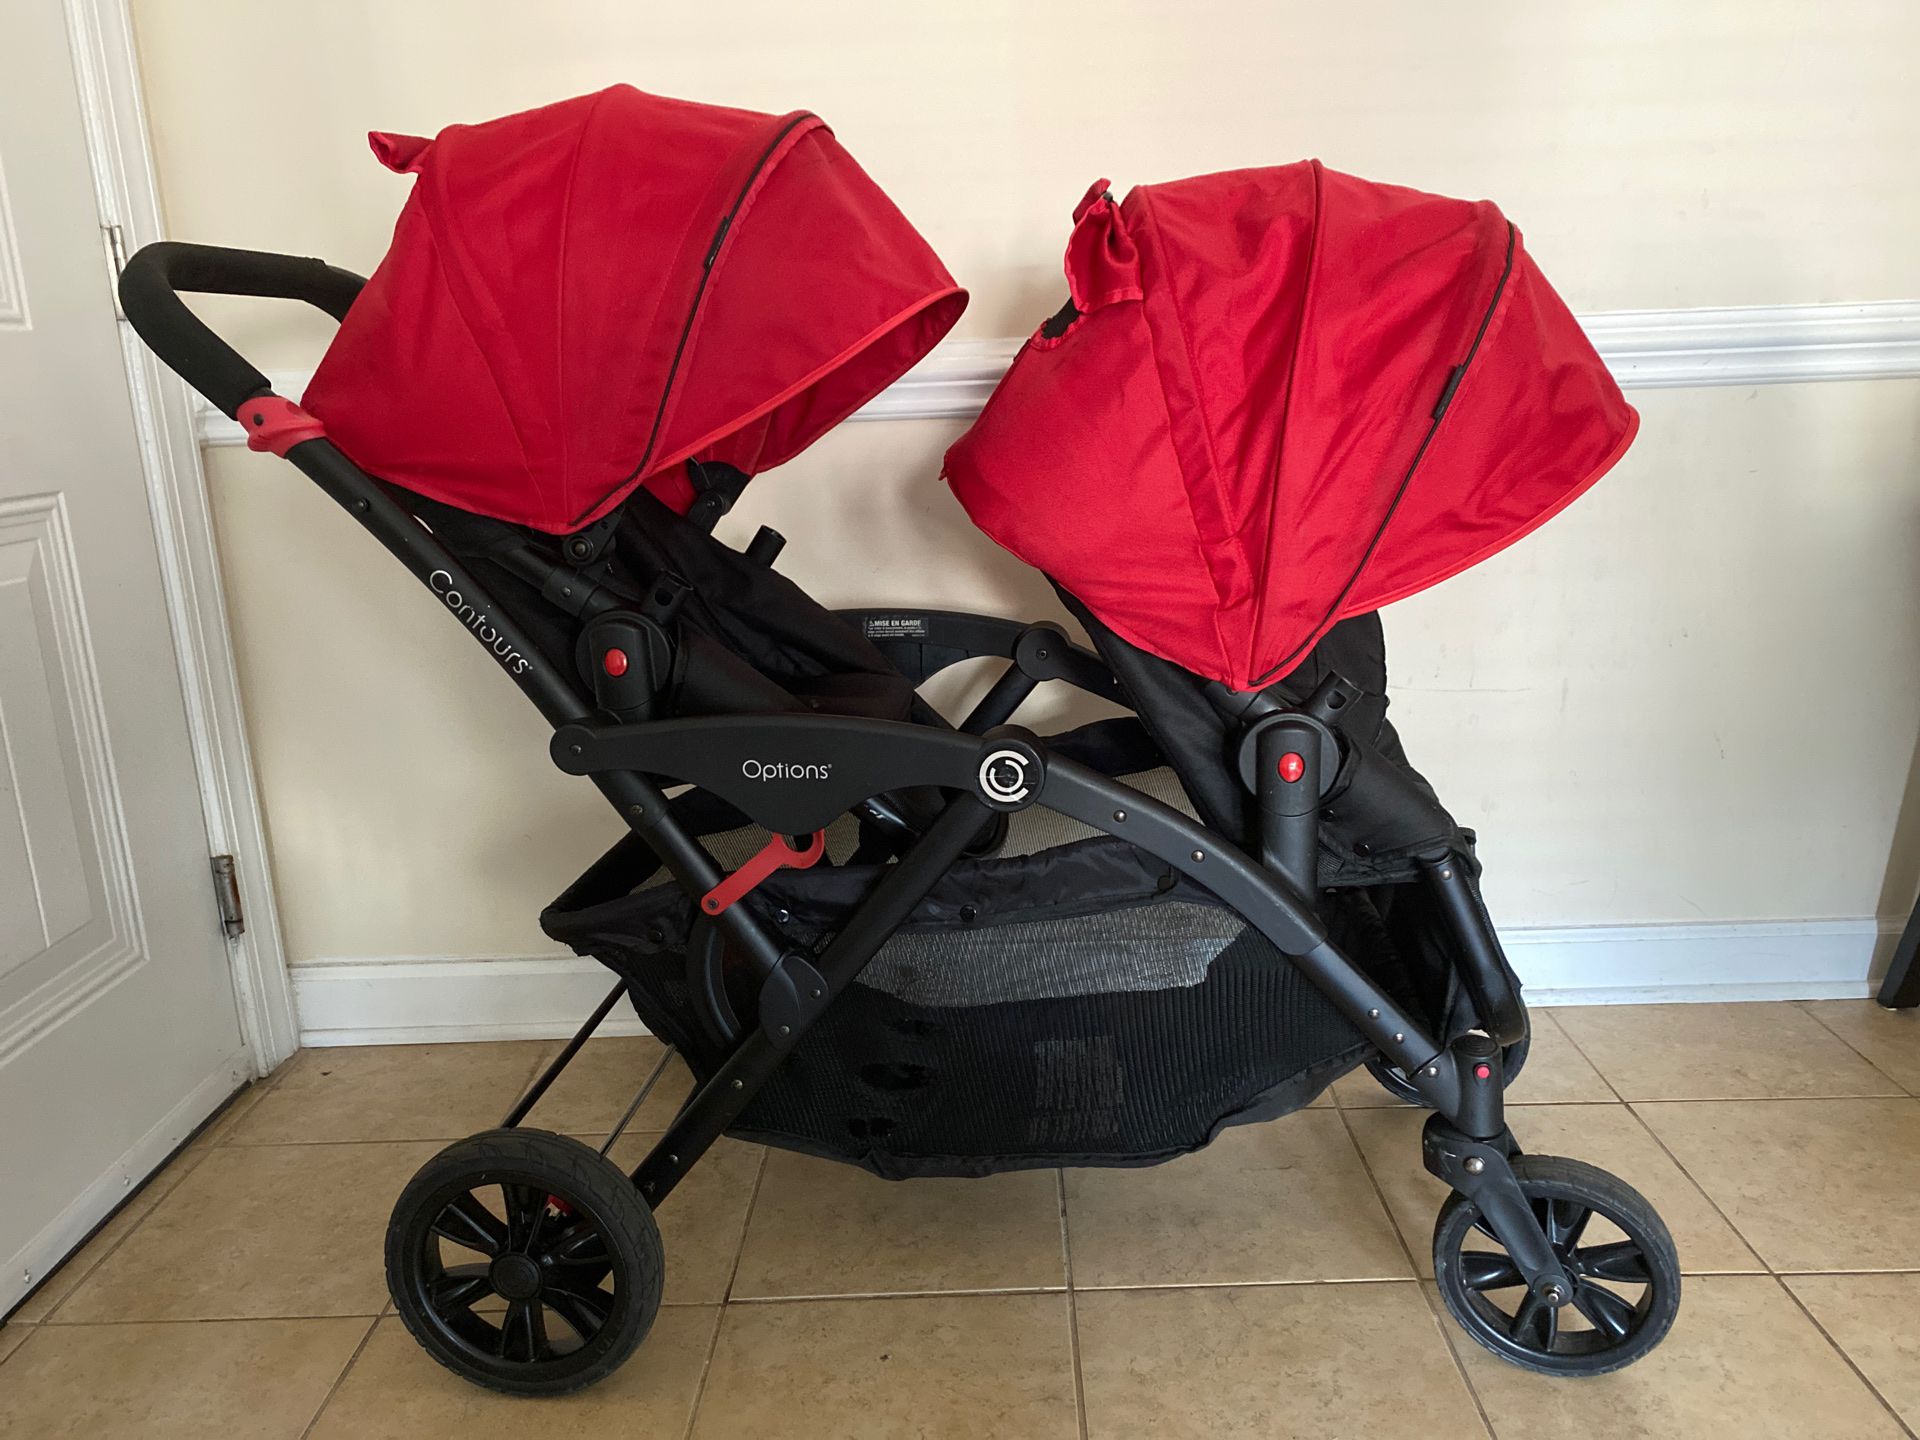 Options double stroller also has a baby swing $80